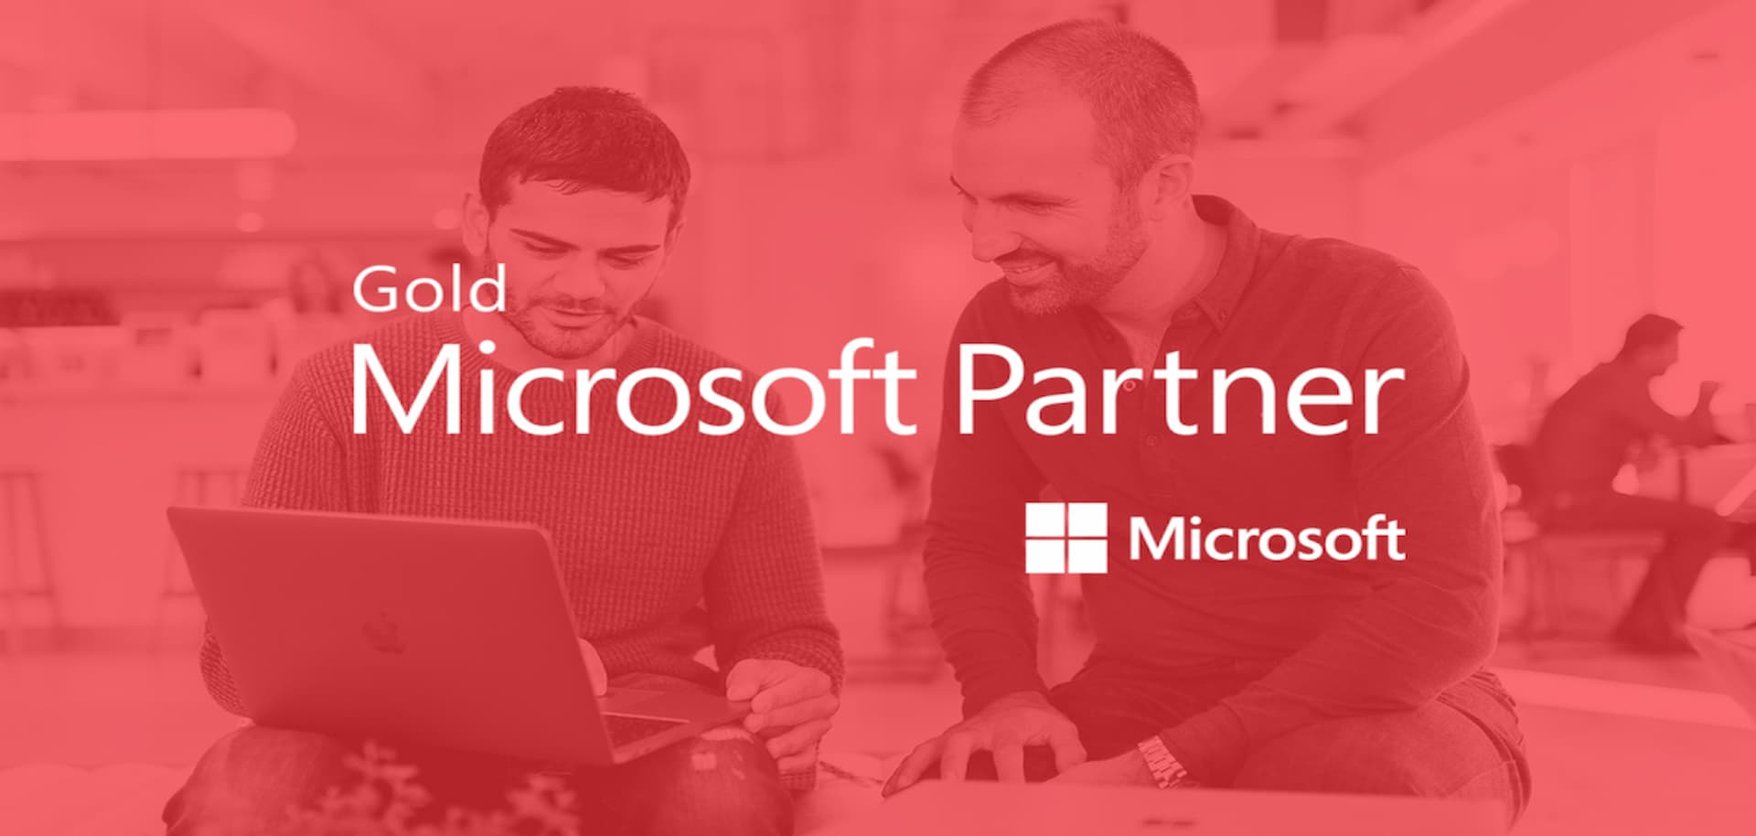 AND Digital Achieves Coveted Microsoft Gold Partner Status(1)